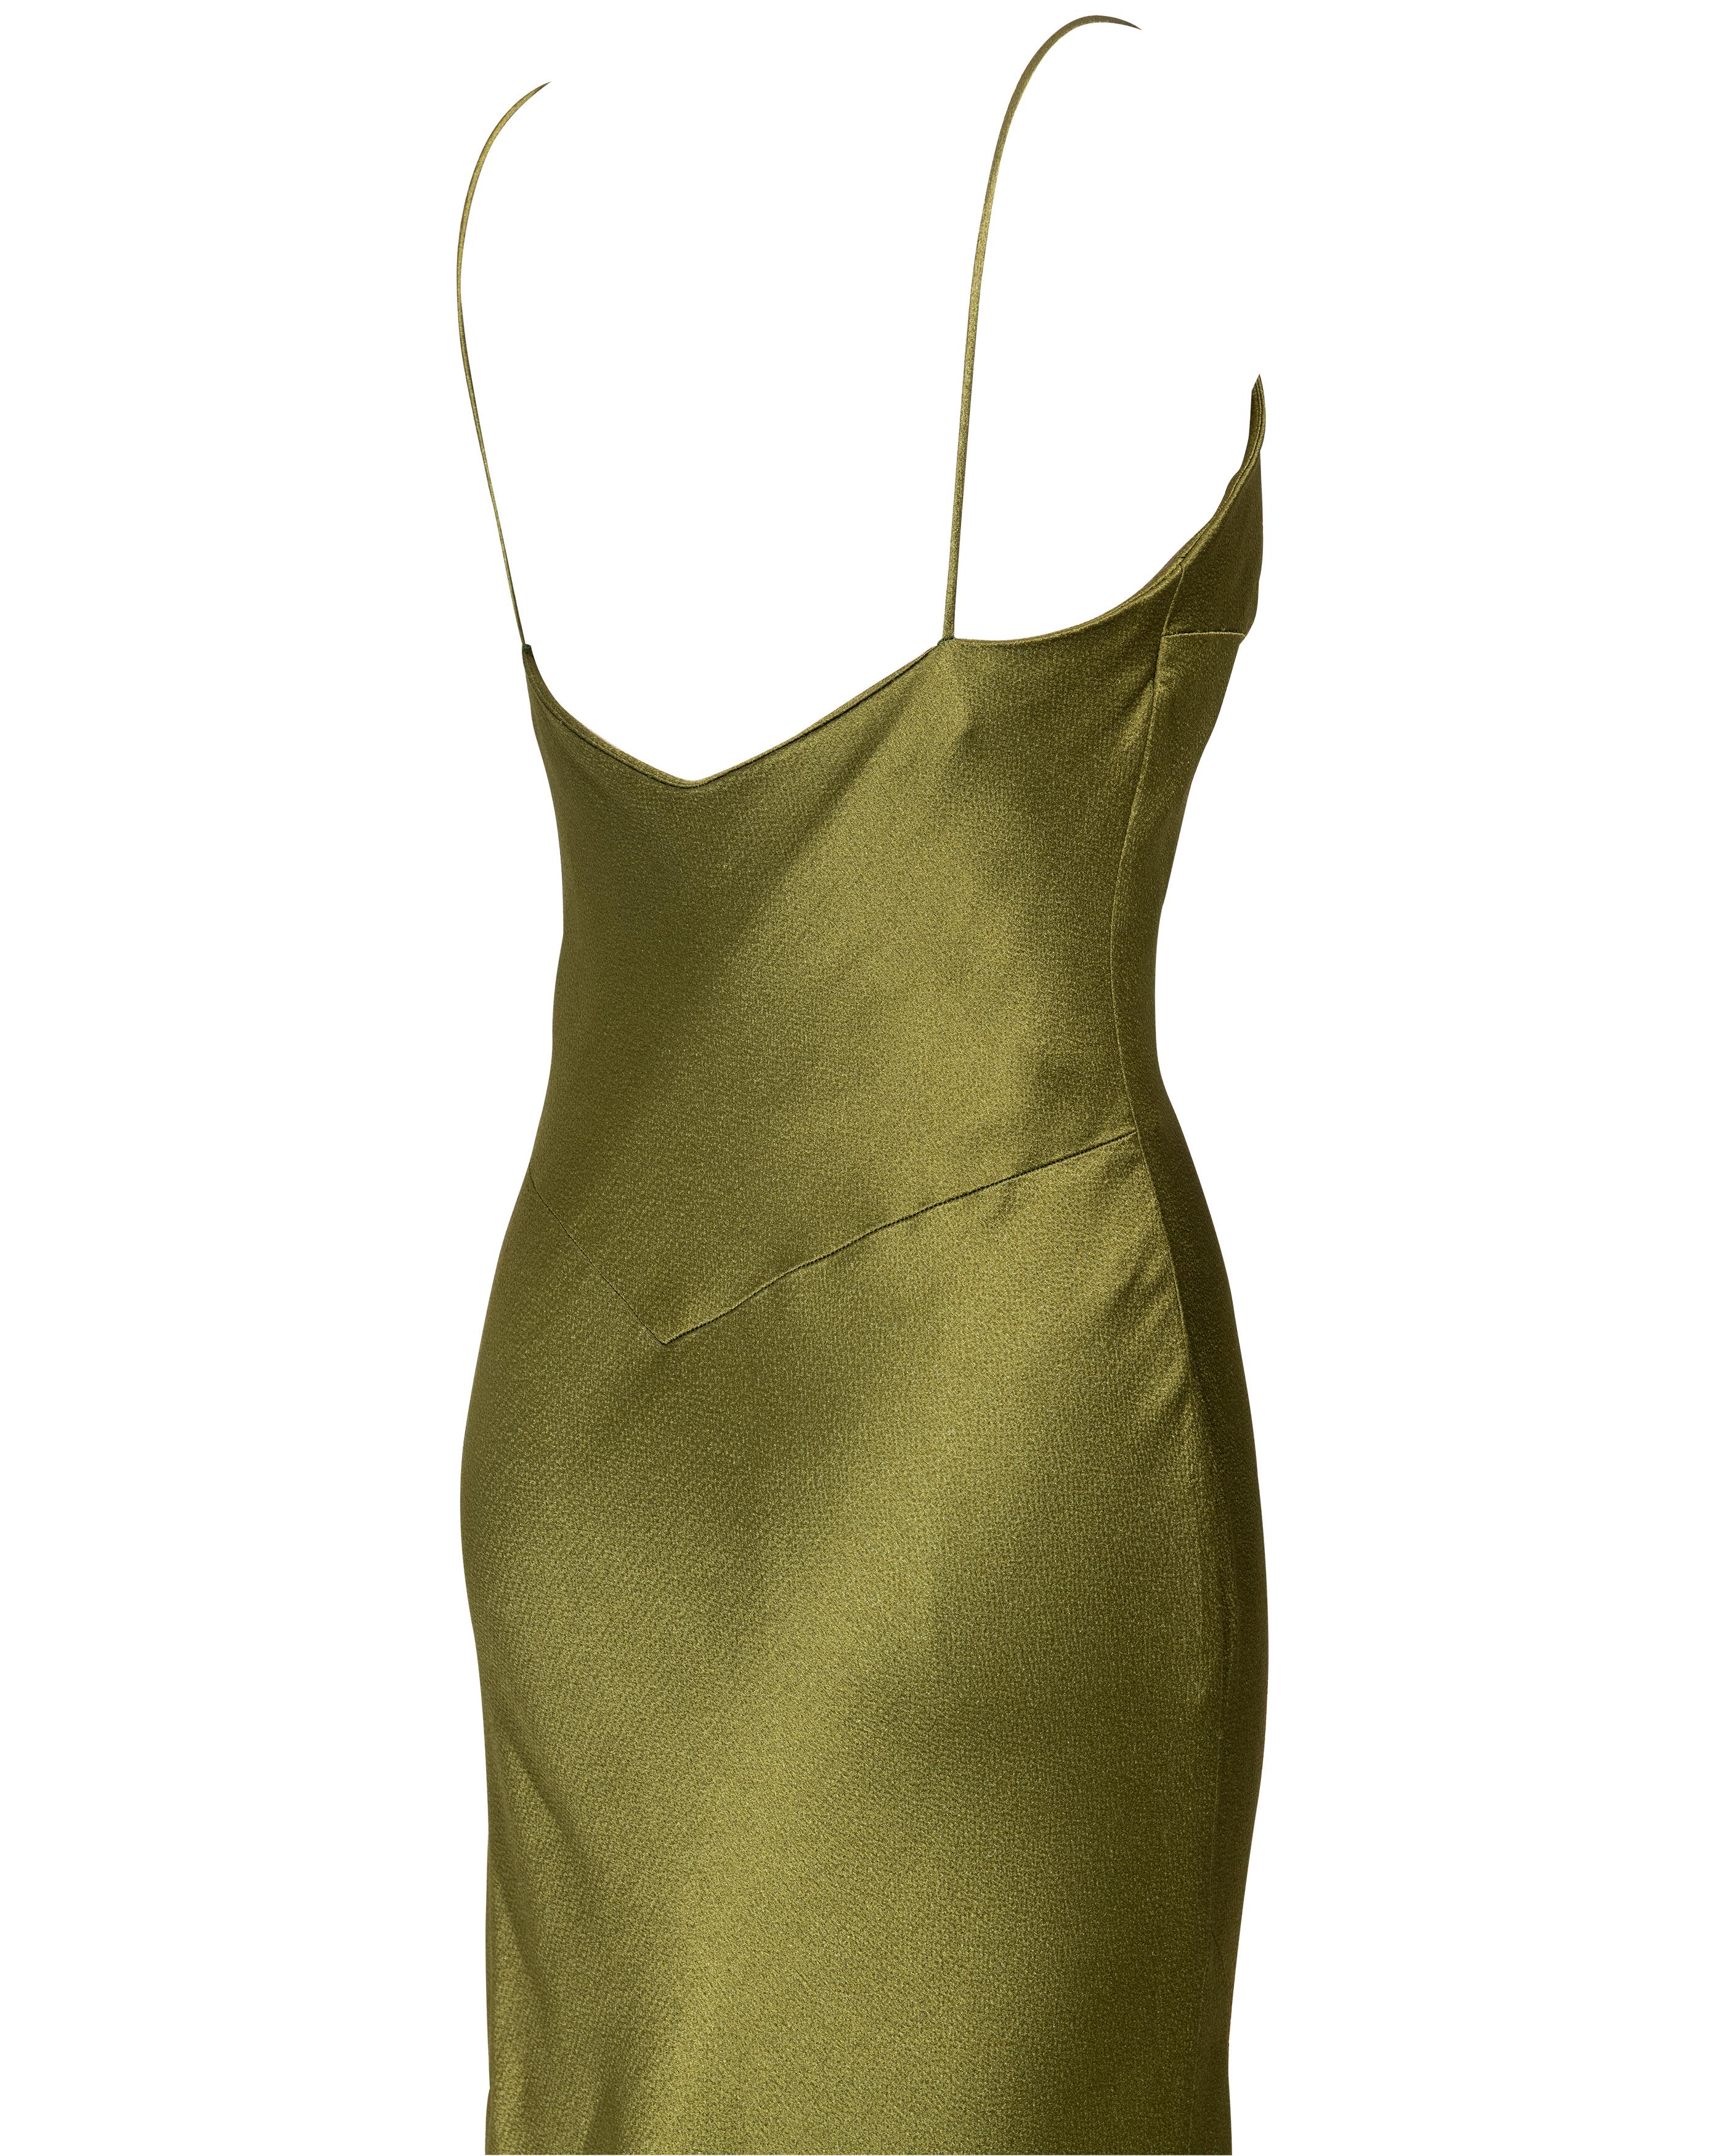 S/S 1999 Christian Dior by John Galliano Olive Green Bias Cut Slip Gown For Sale 5